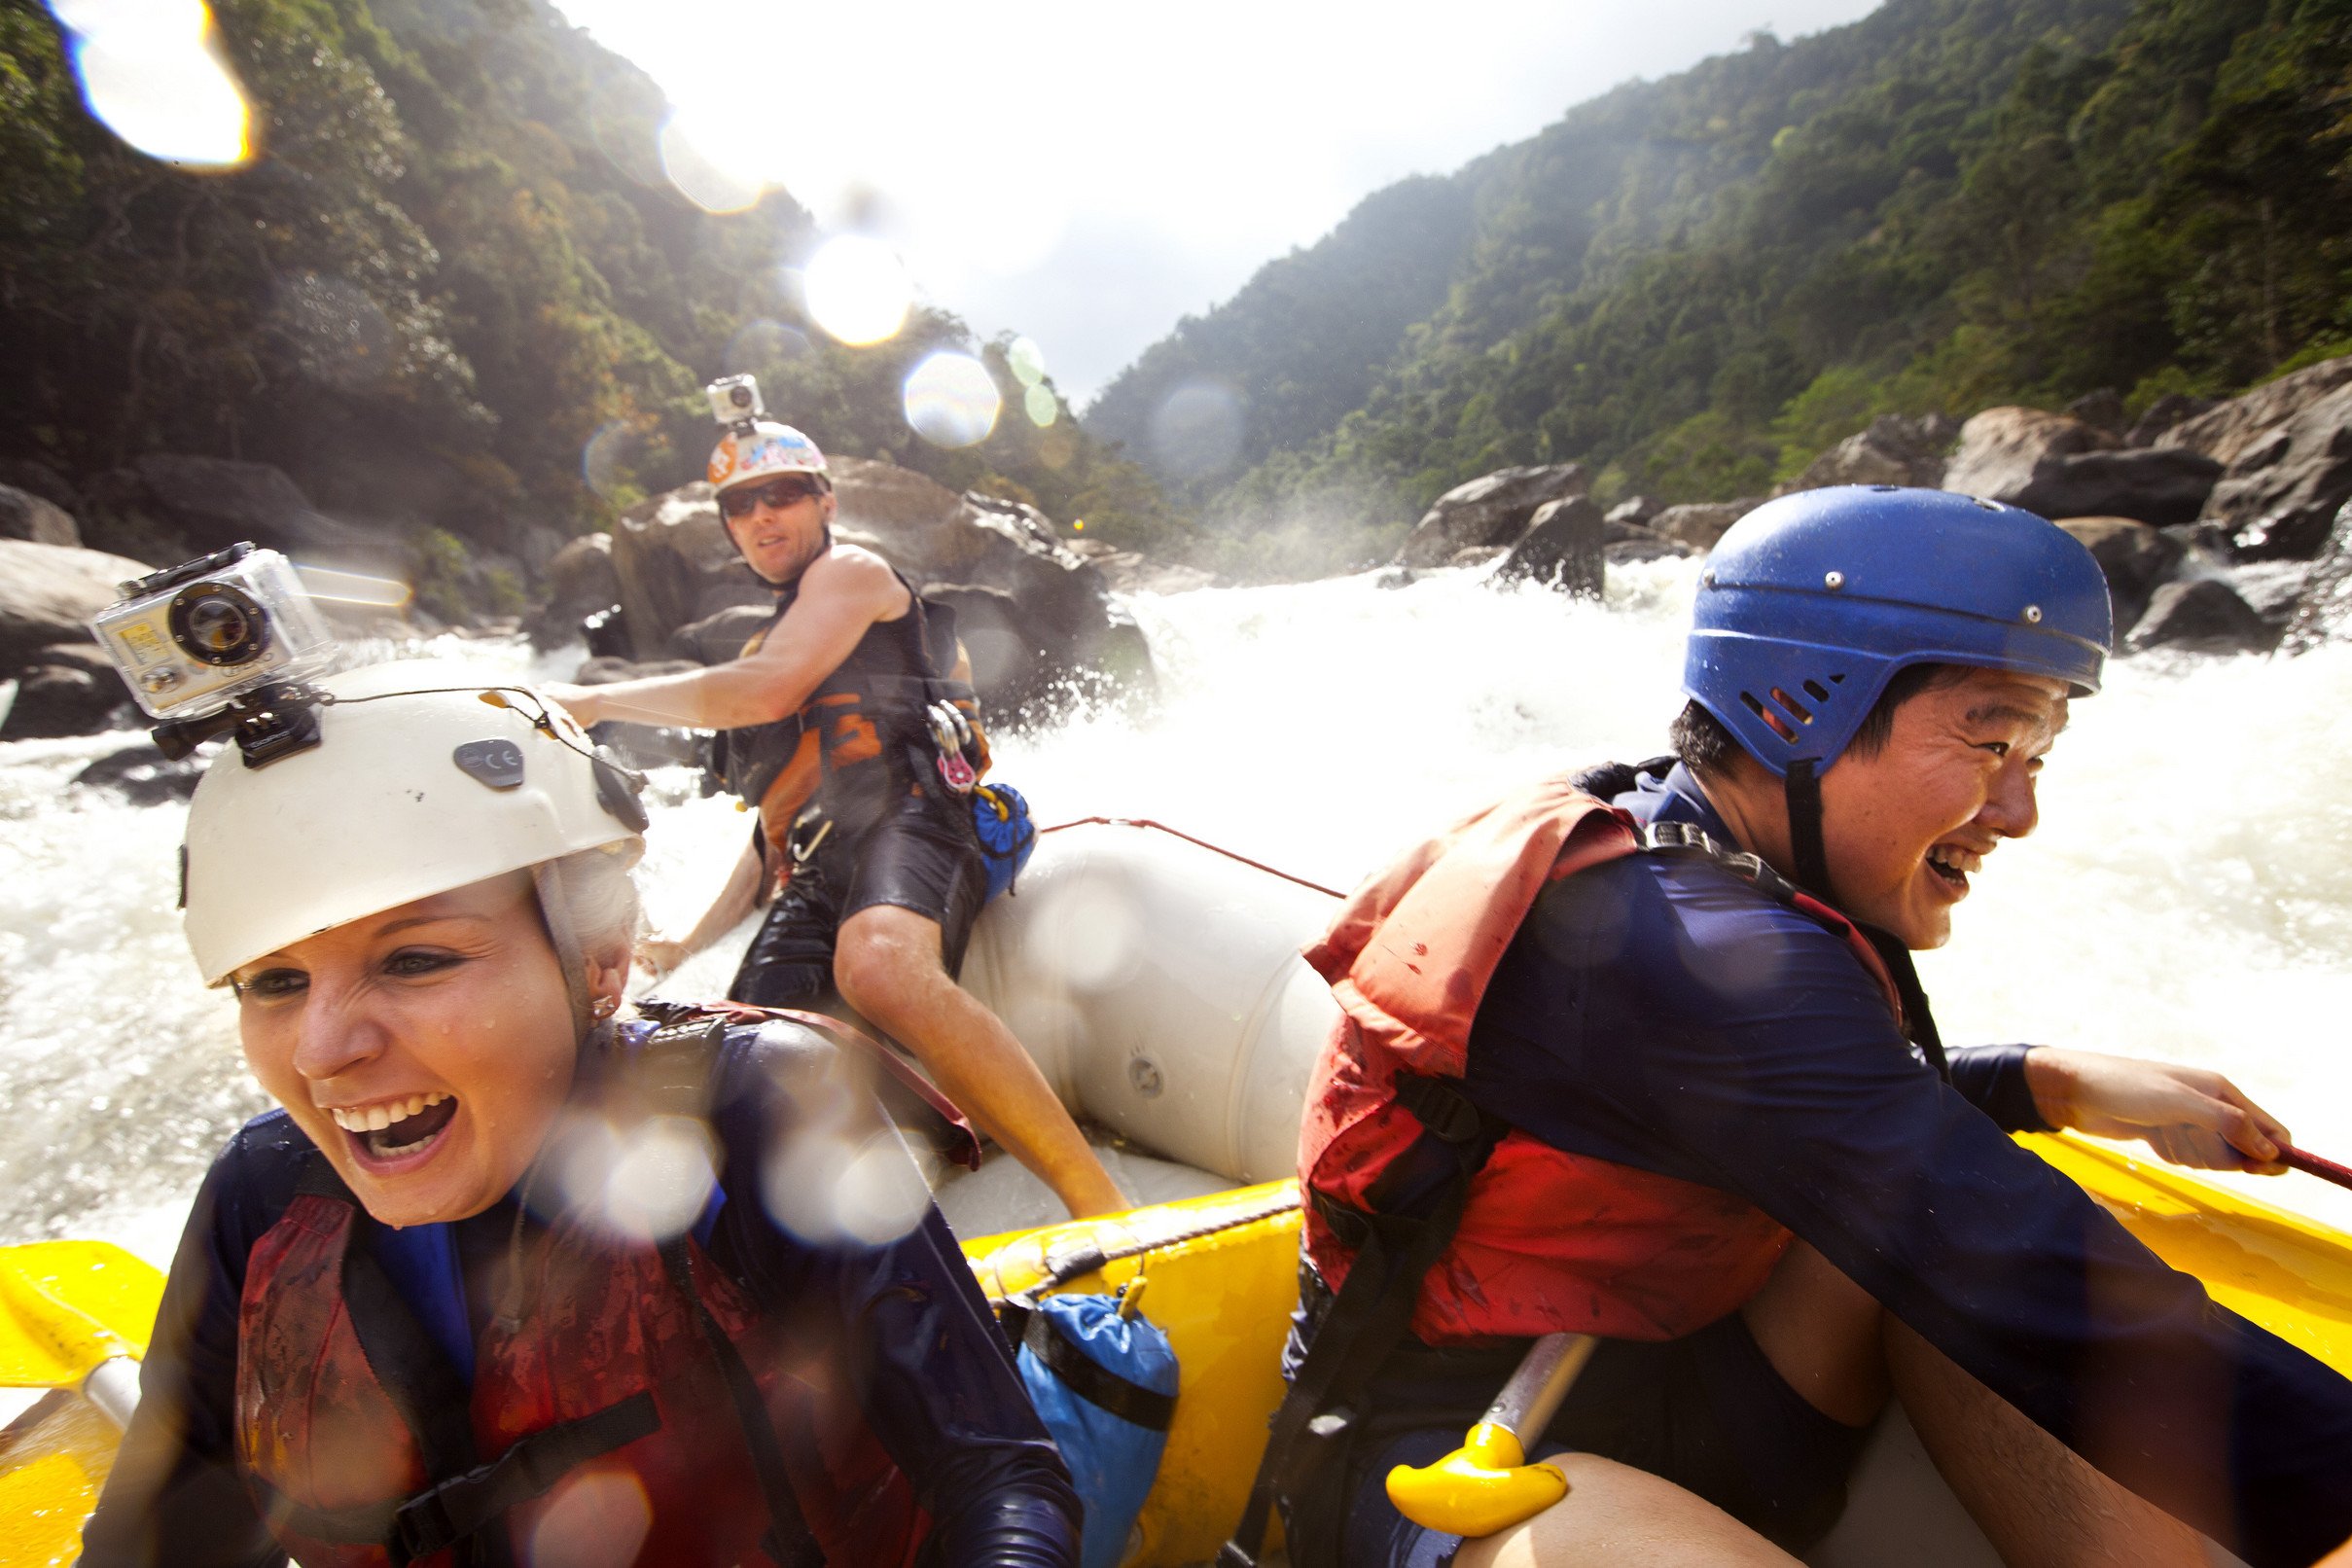 Tully River Full Day White Water Rafting Adventure